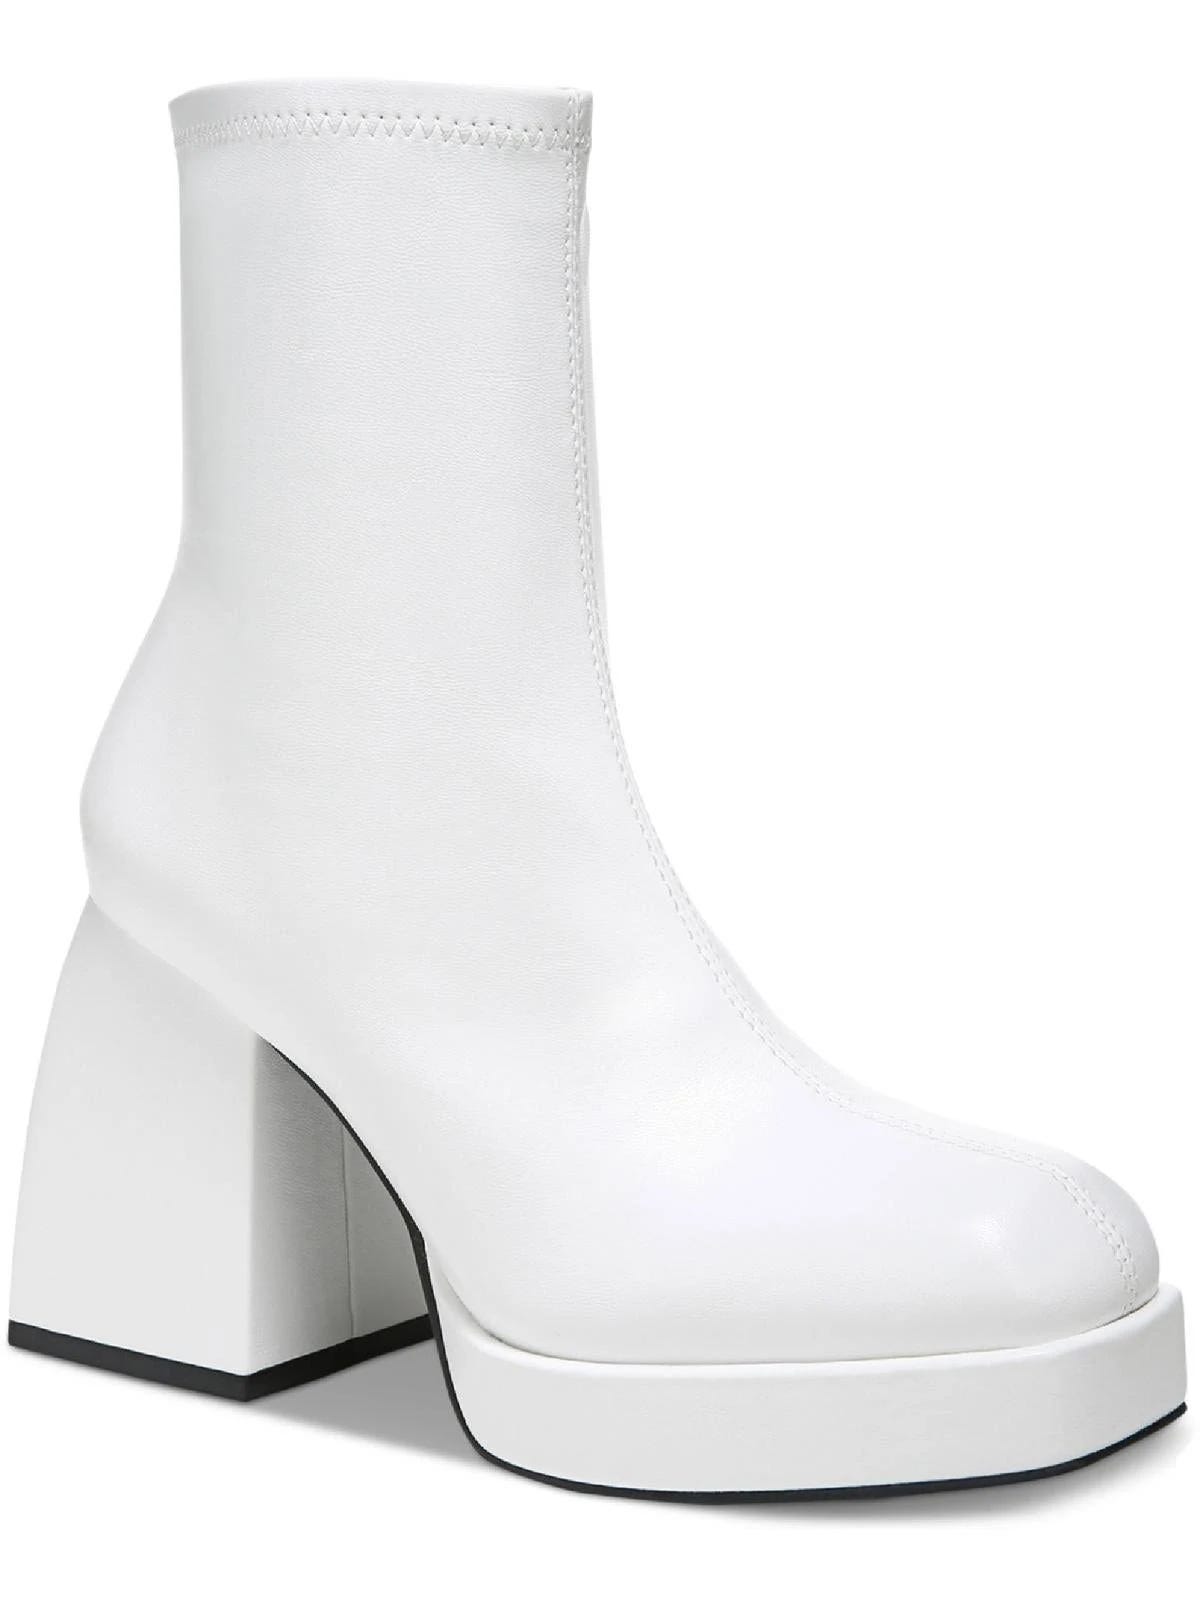 Bar III White Narita Faux Leather Block Heel Ankle Boots | Image